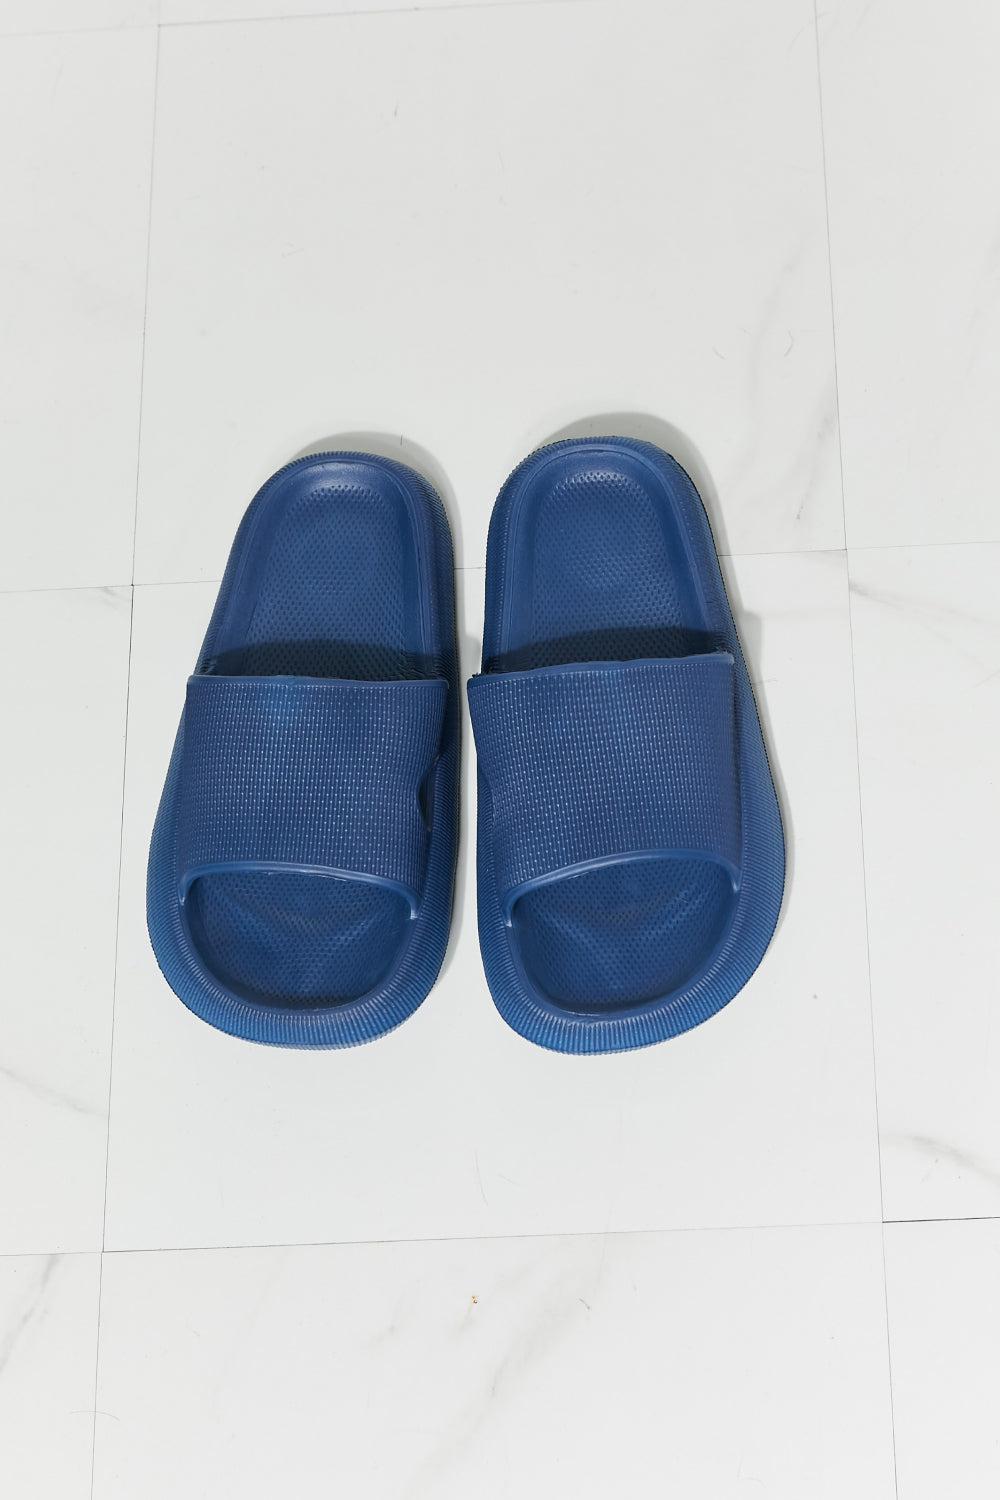 MMShoes Arms Around Me Open Toe Slide in Navy BLUE ZONE PLANET